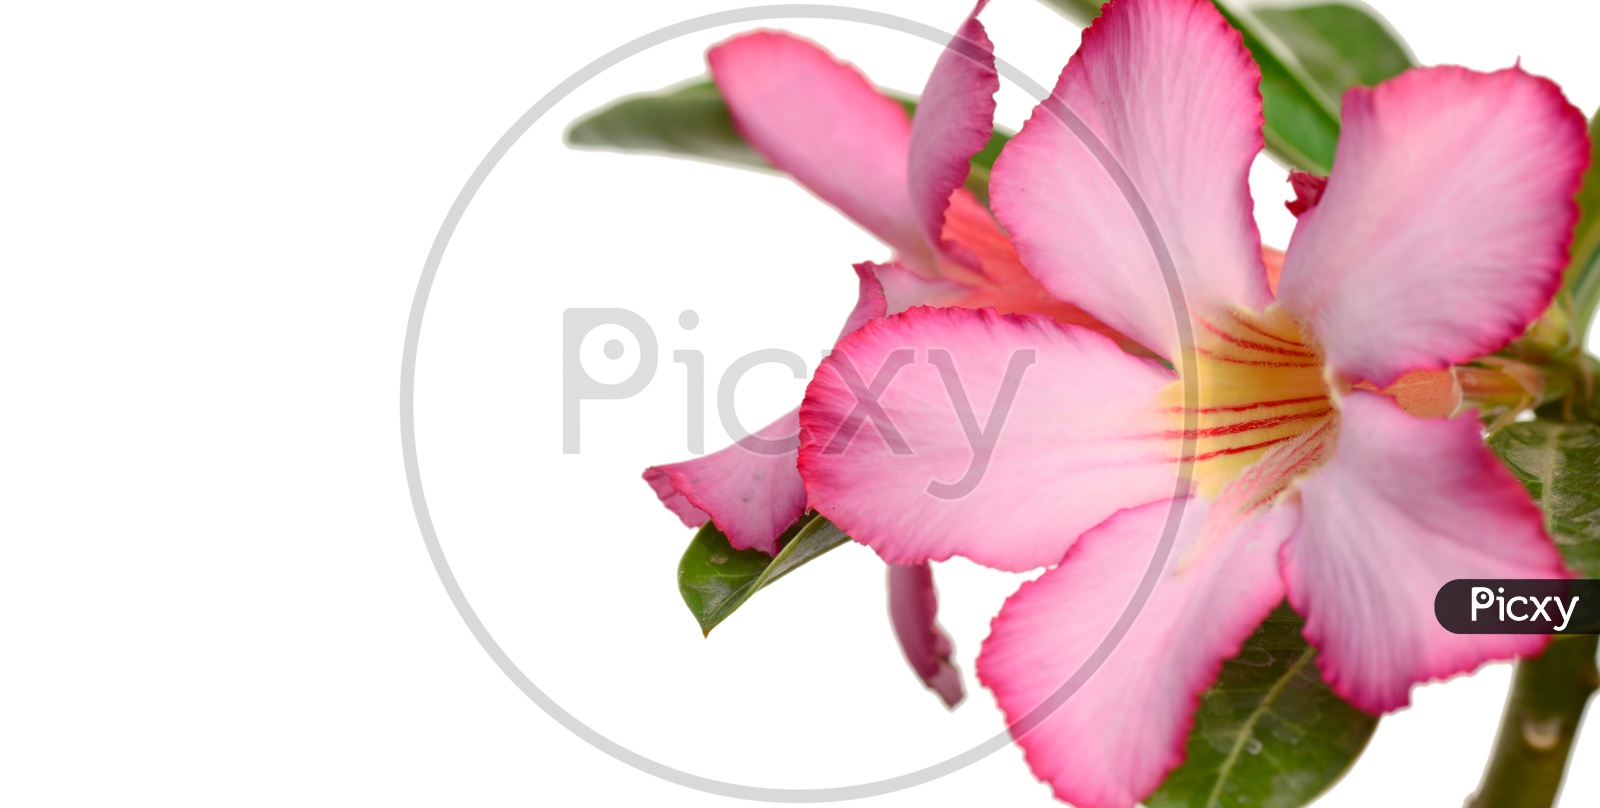 Pink Adenium or Desert Rose A Tropical Flower Closeup With an Isolated White  Background